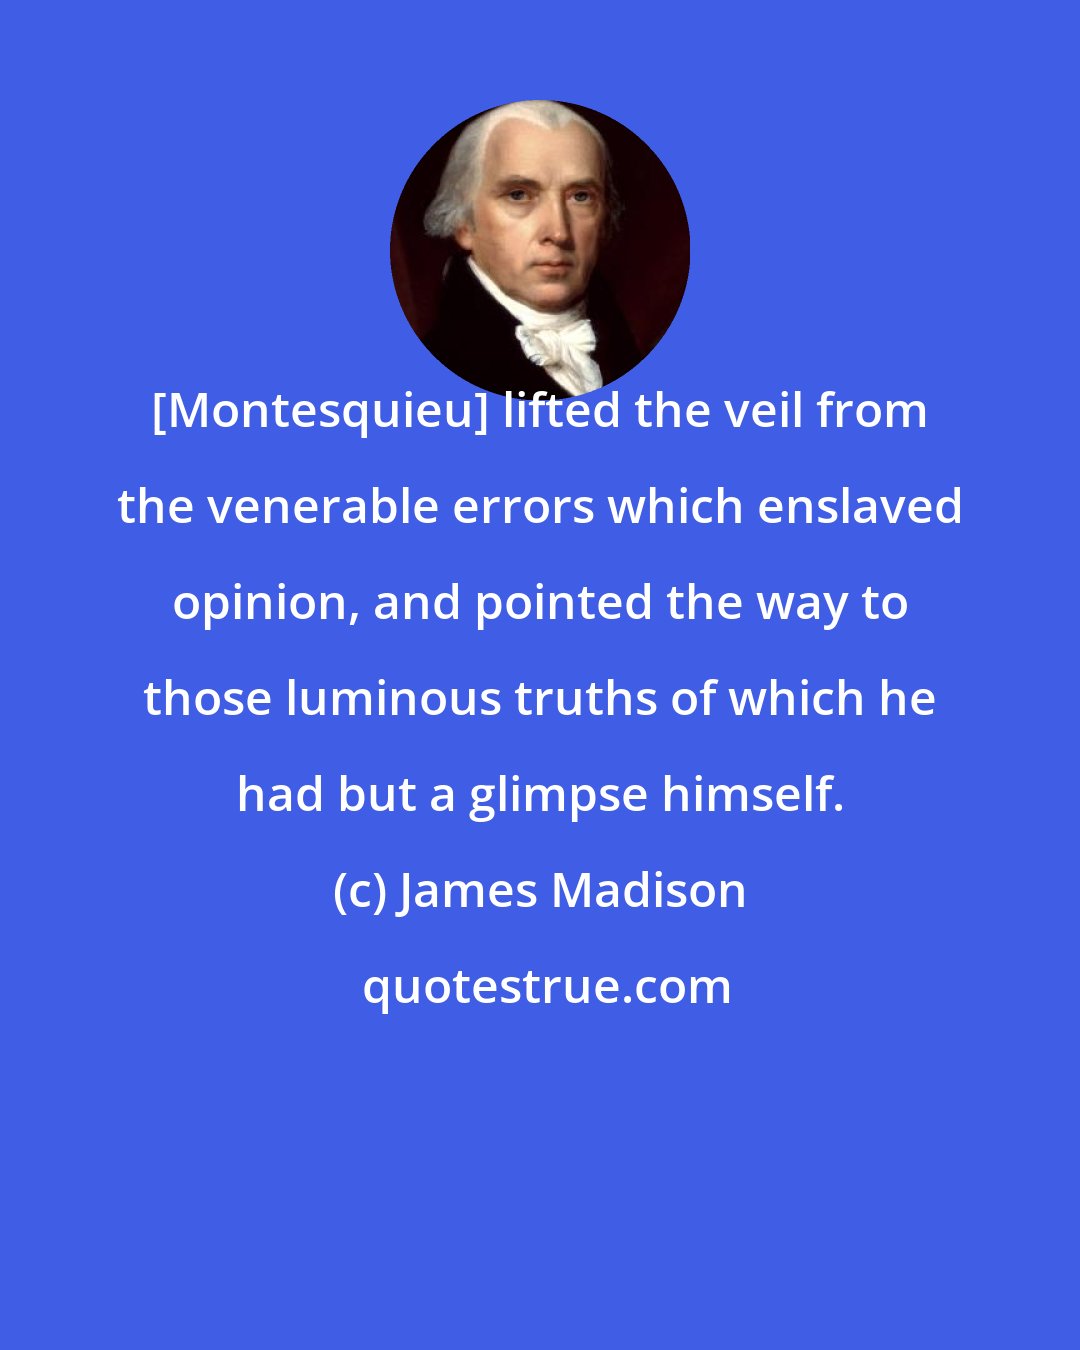 James Madison: [Montesquieu] lifted the veil from the venerable errors which enslaved opinion, and pointed the way to those luminous truths of which he had but a glimpse himself.